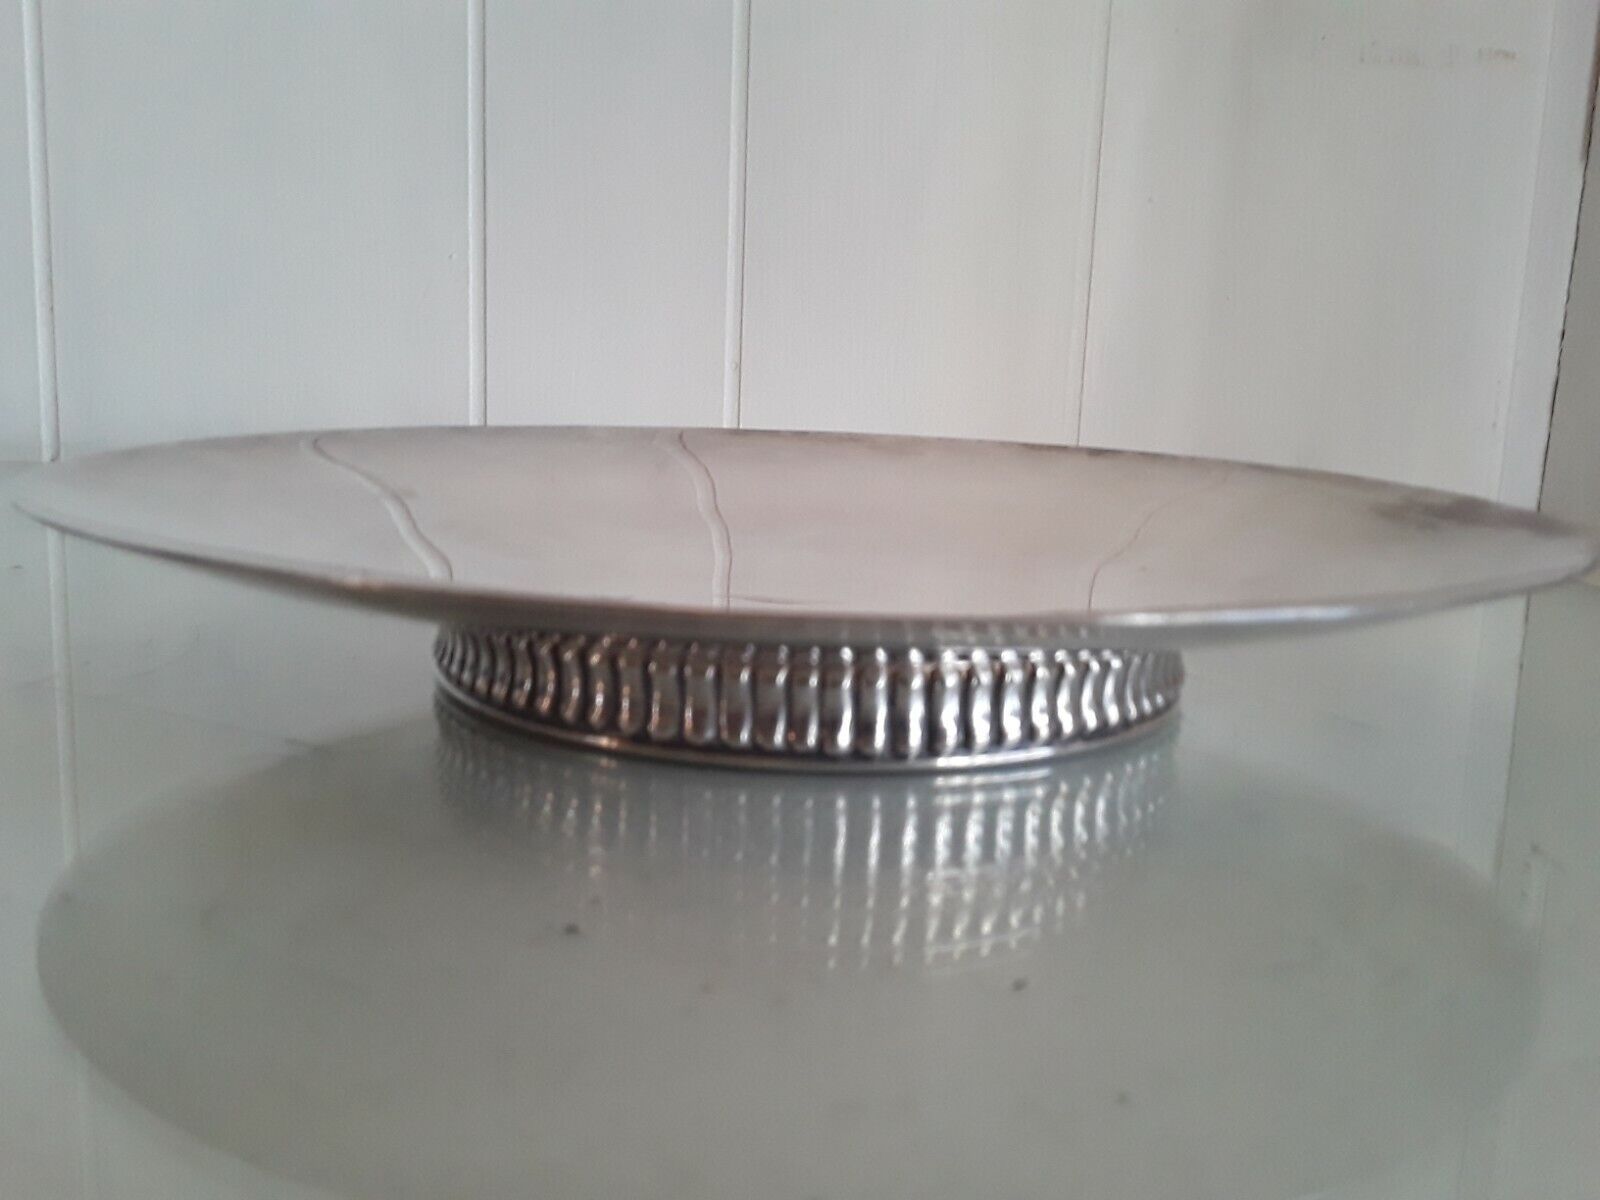 Reed Barton Vtg Silverplate Tray Footed Serving Dish 10